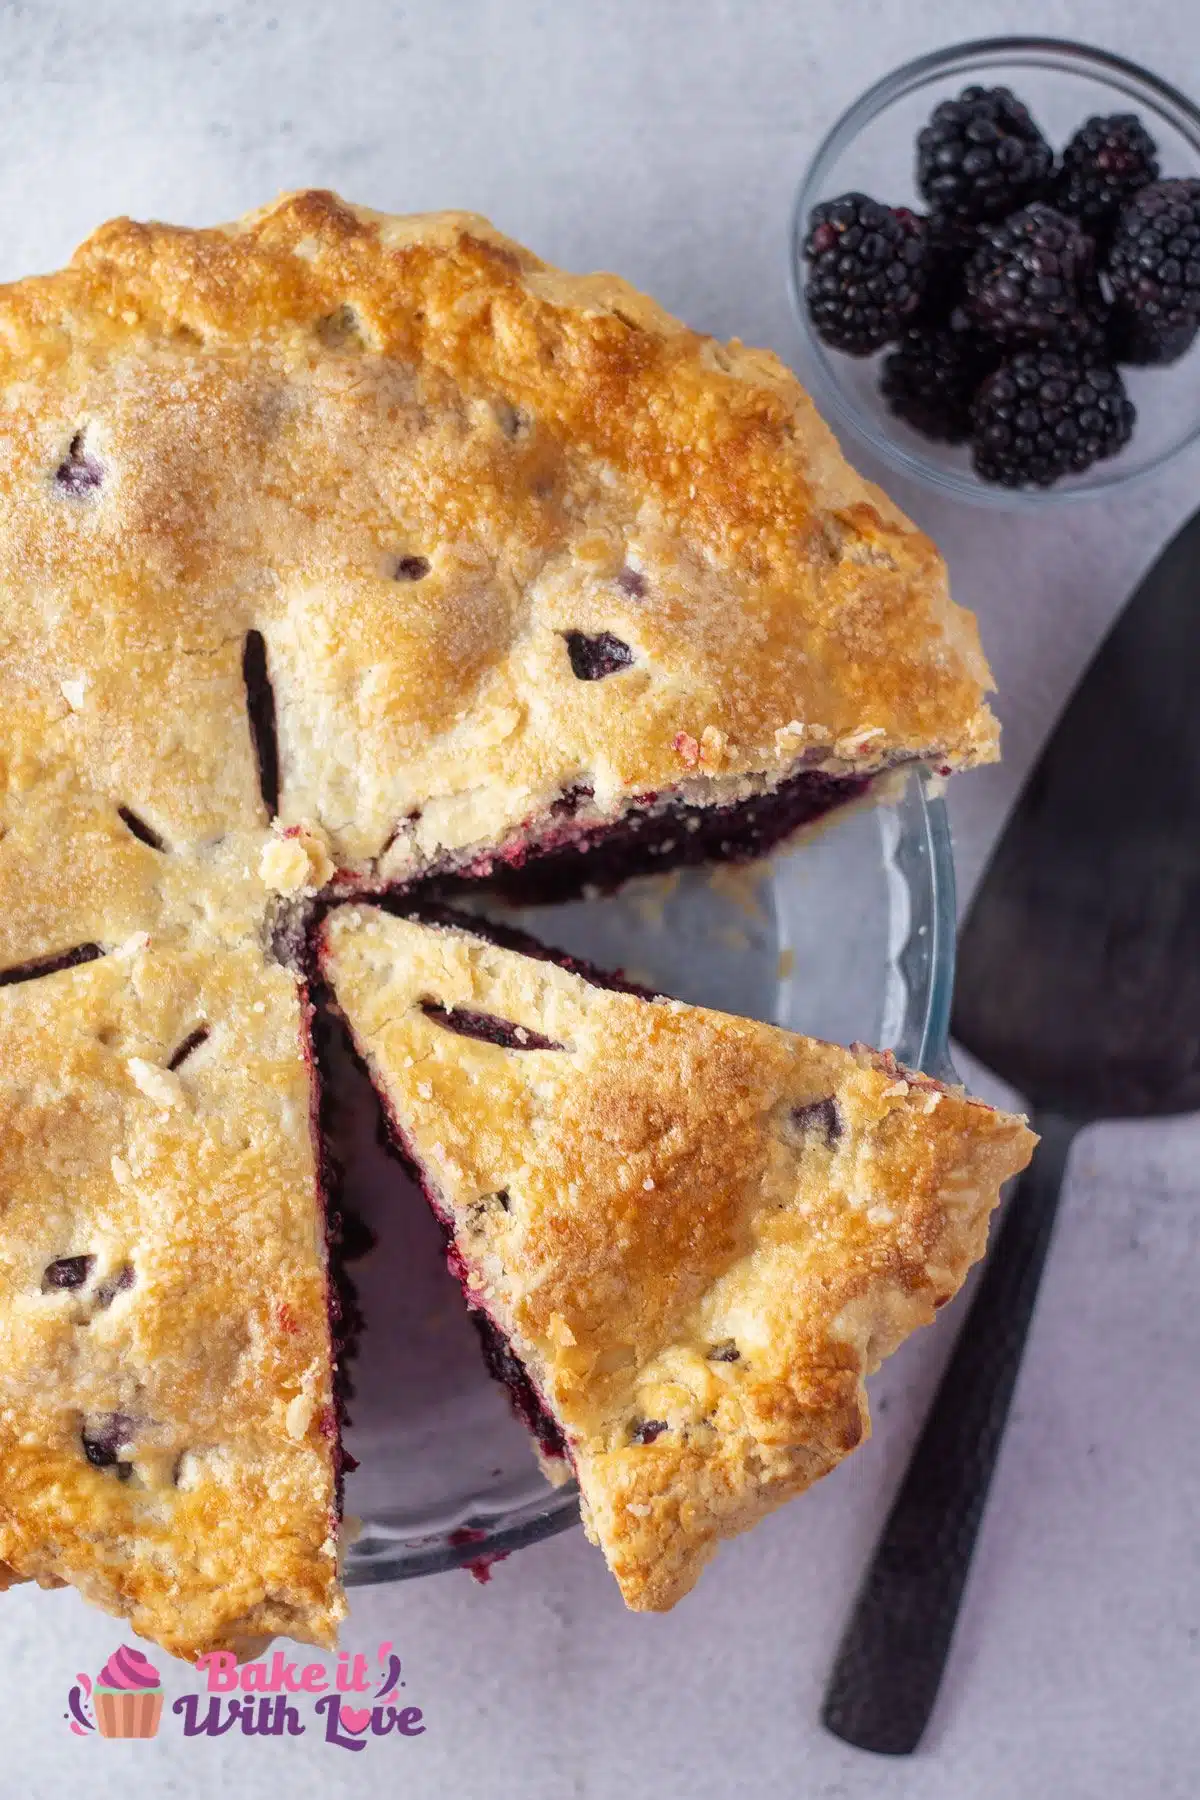 Tall image of blackberry pie whole with slice missing.